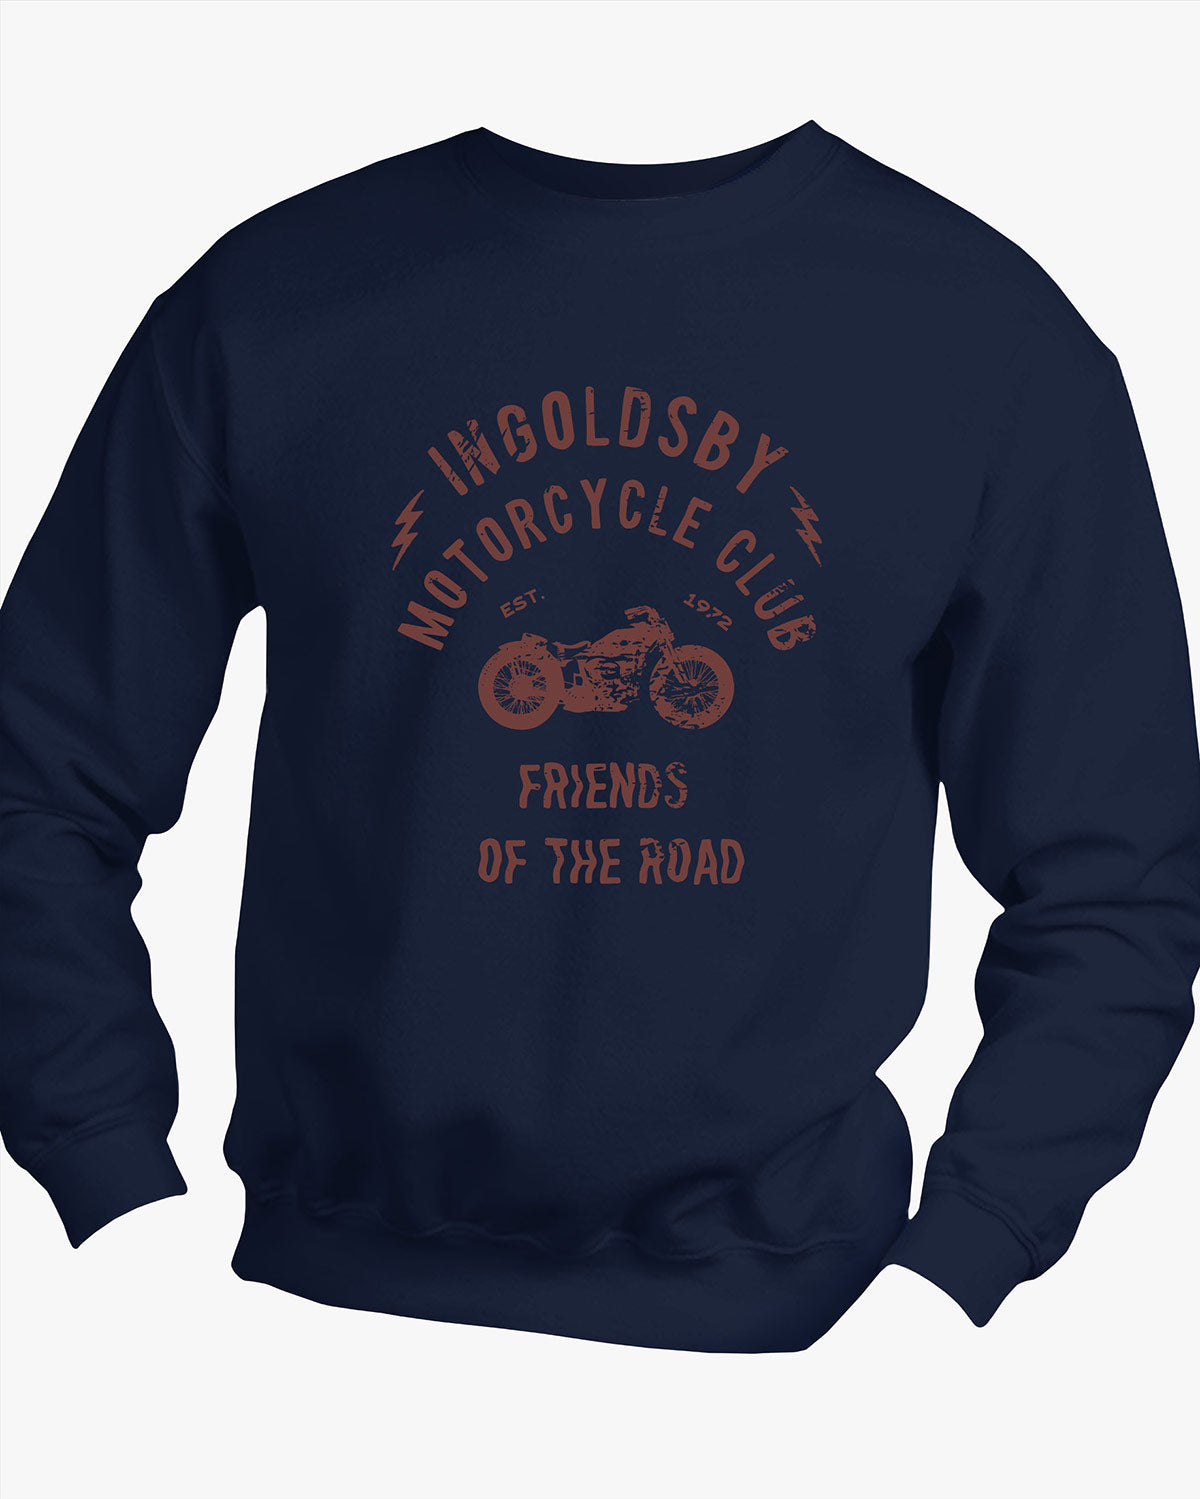 Motorcycle Club - Ingoldsby - Sweater